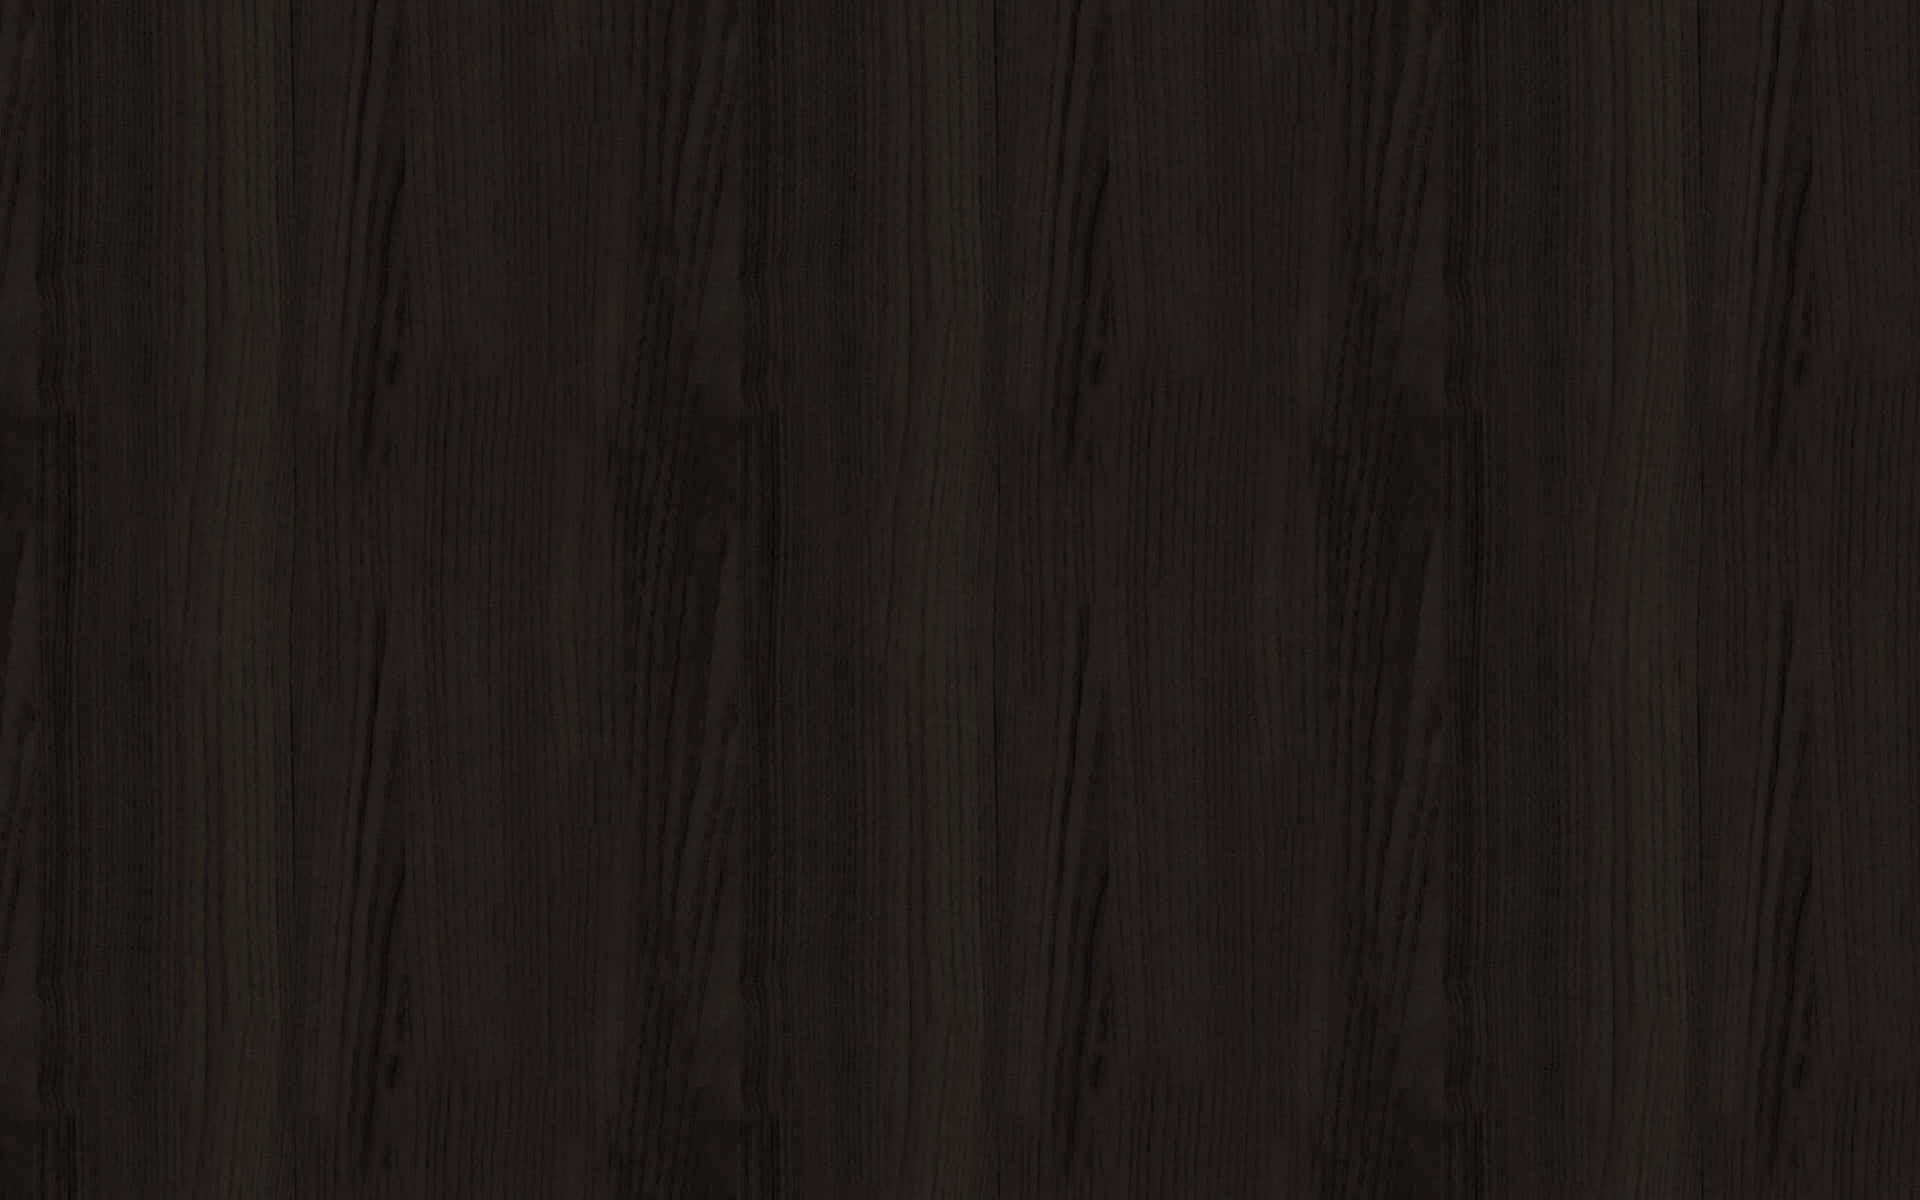 Natural High-Resolution Wood Grain Background